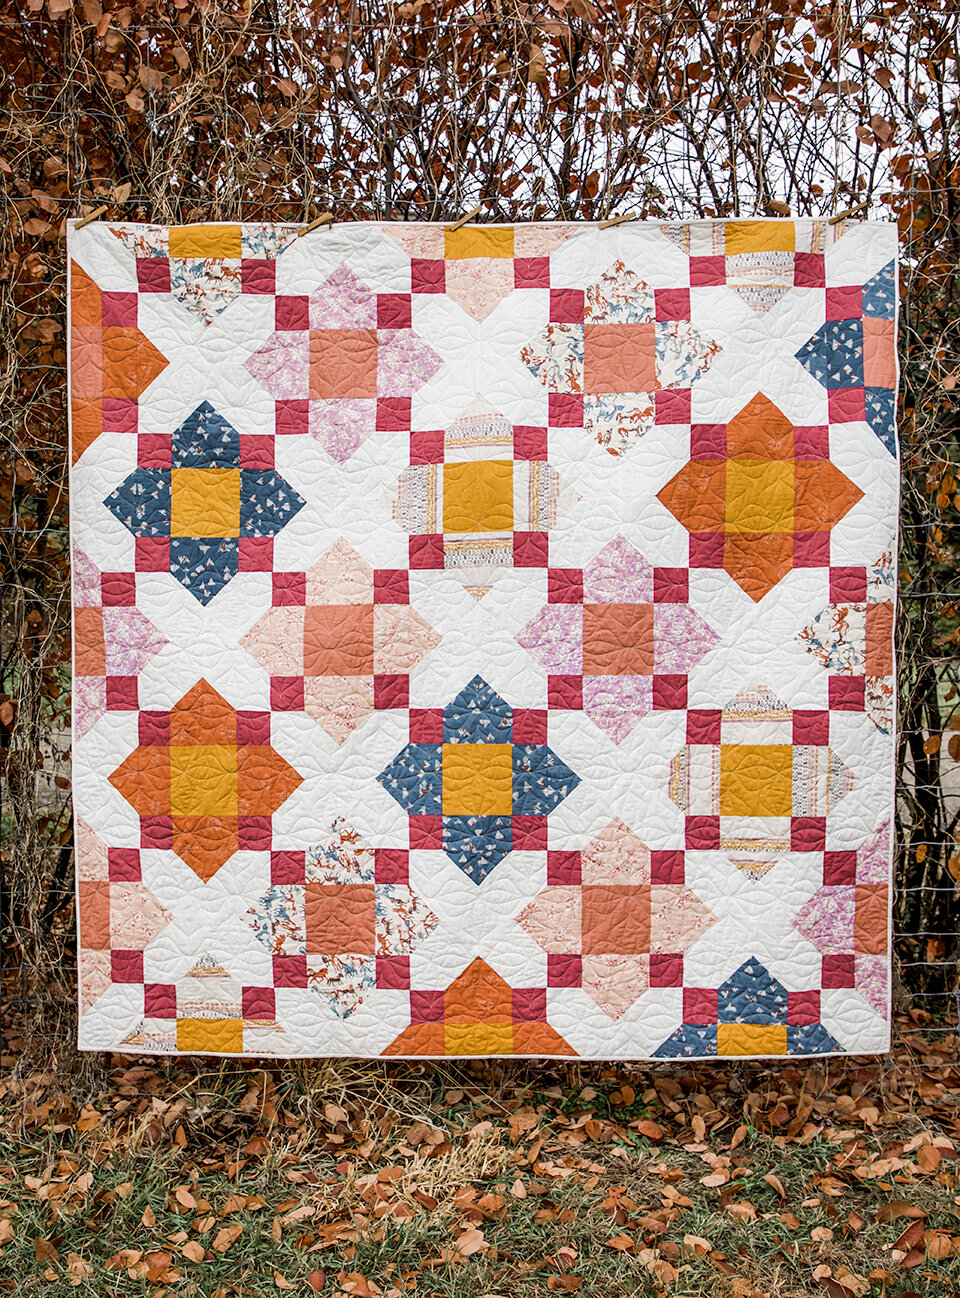 Perfect Patchwork — Sharon Holland Designs